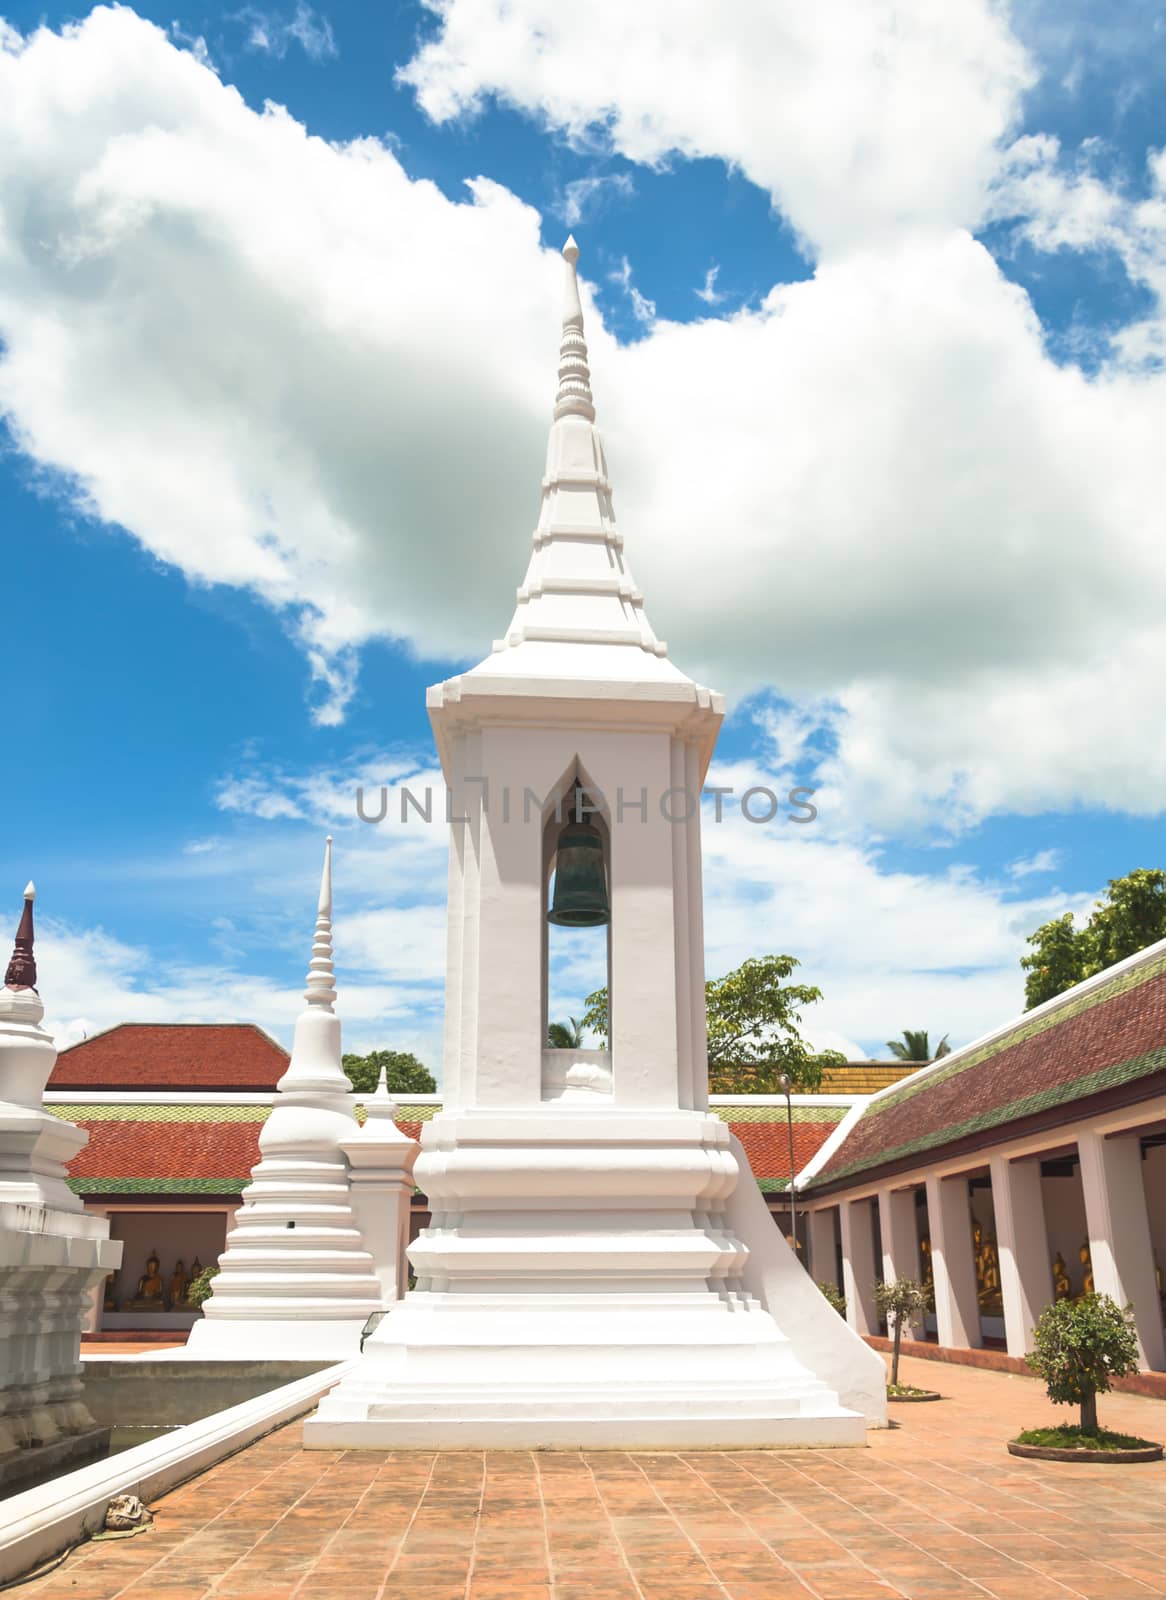 Campanile at Wat Phra Borommathat Chaiya, is public temple in Chaiya district,Surat Thani province, South of Thailand.